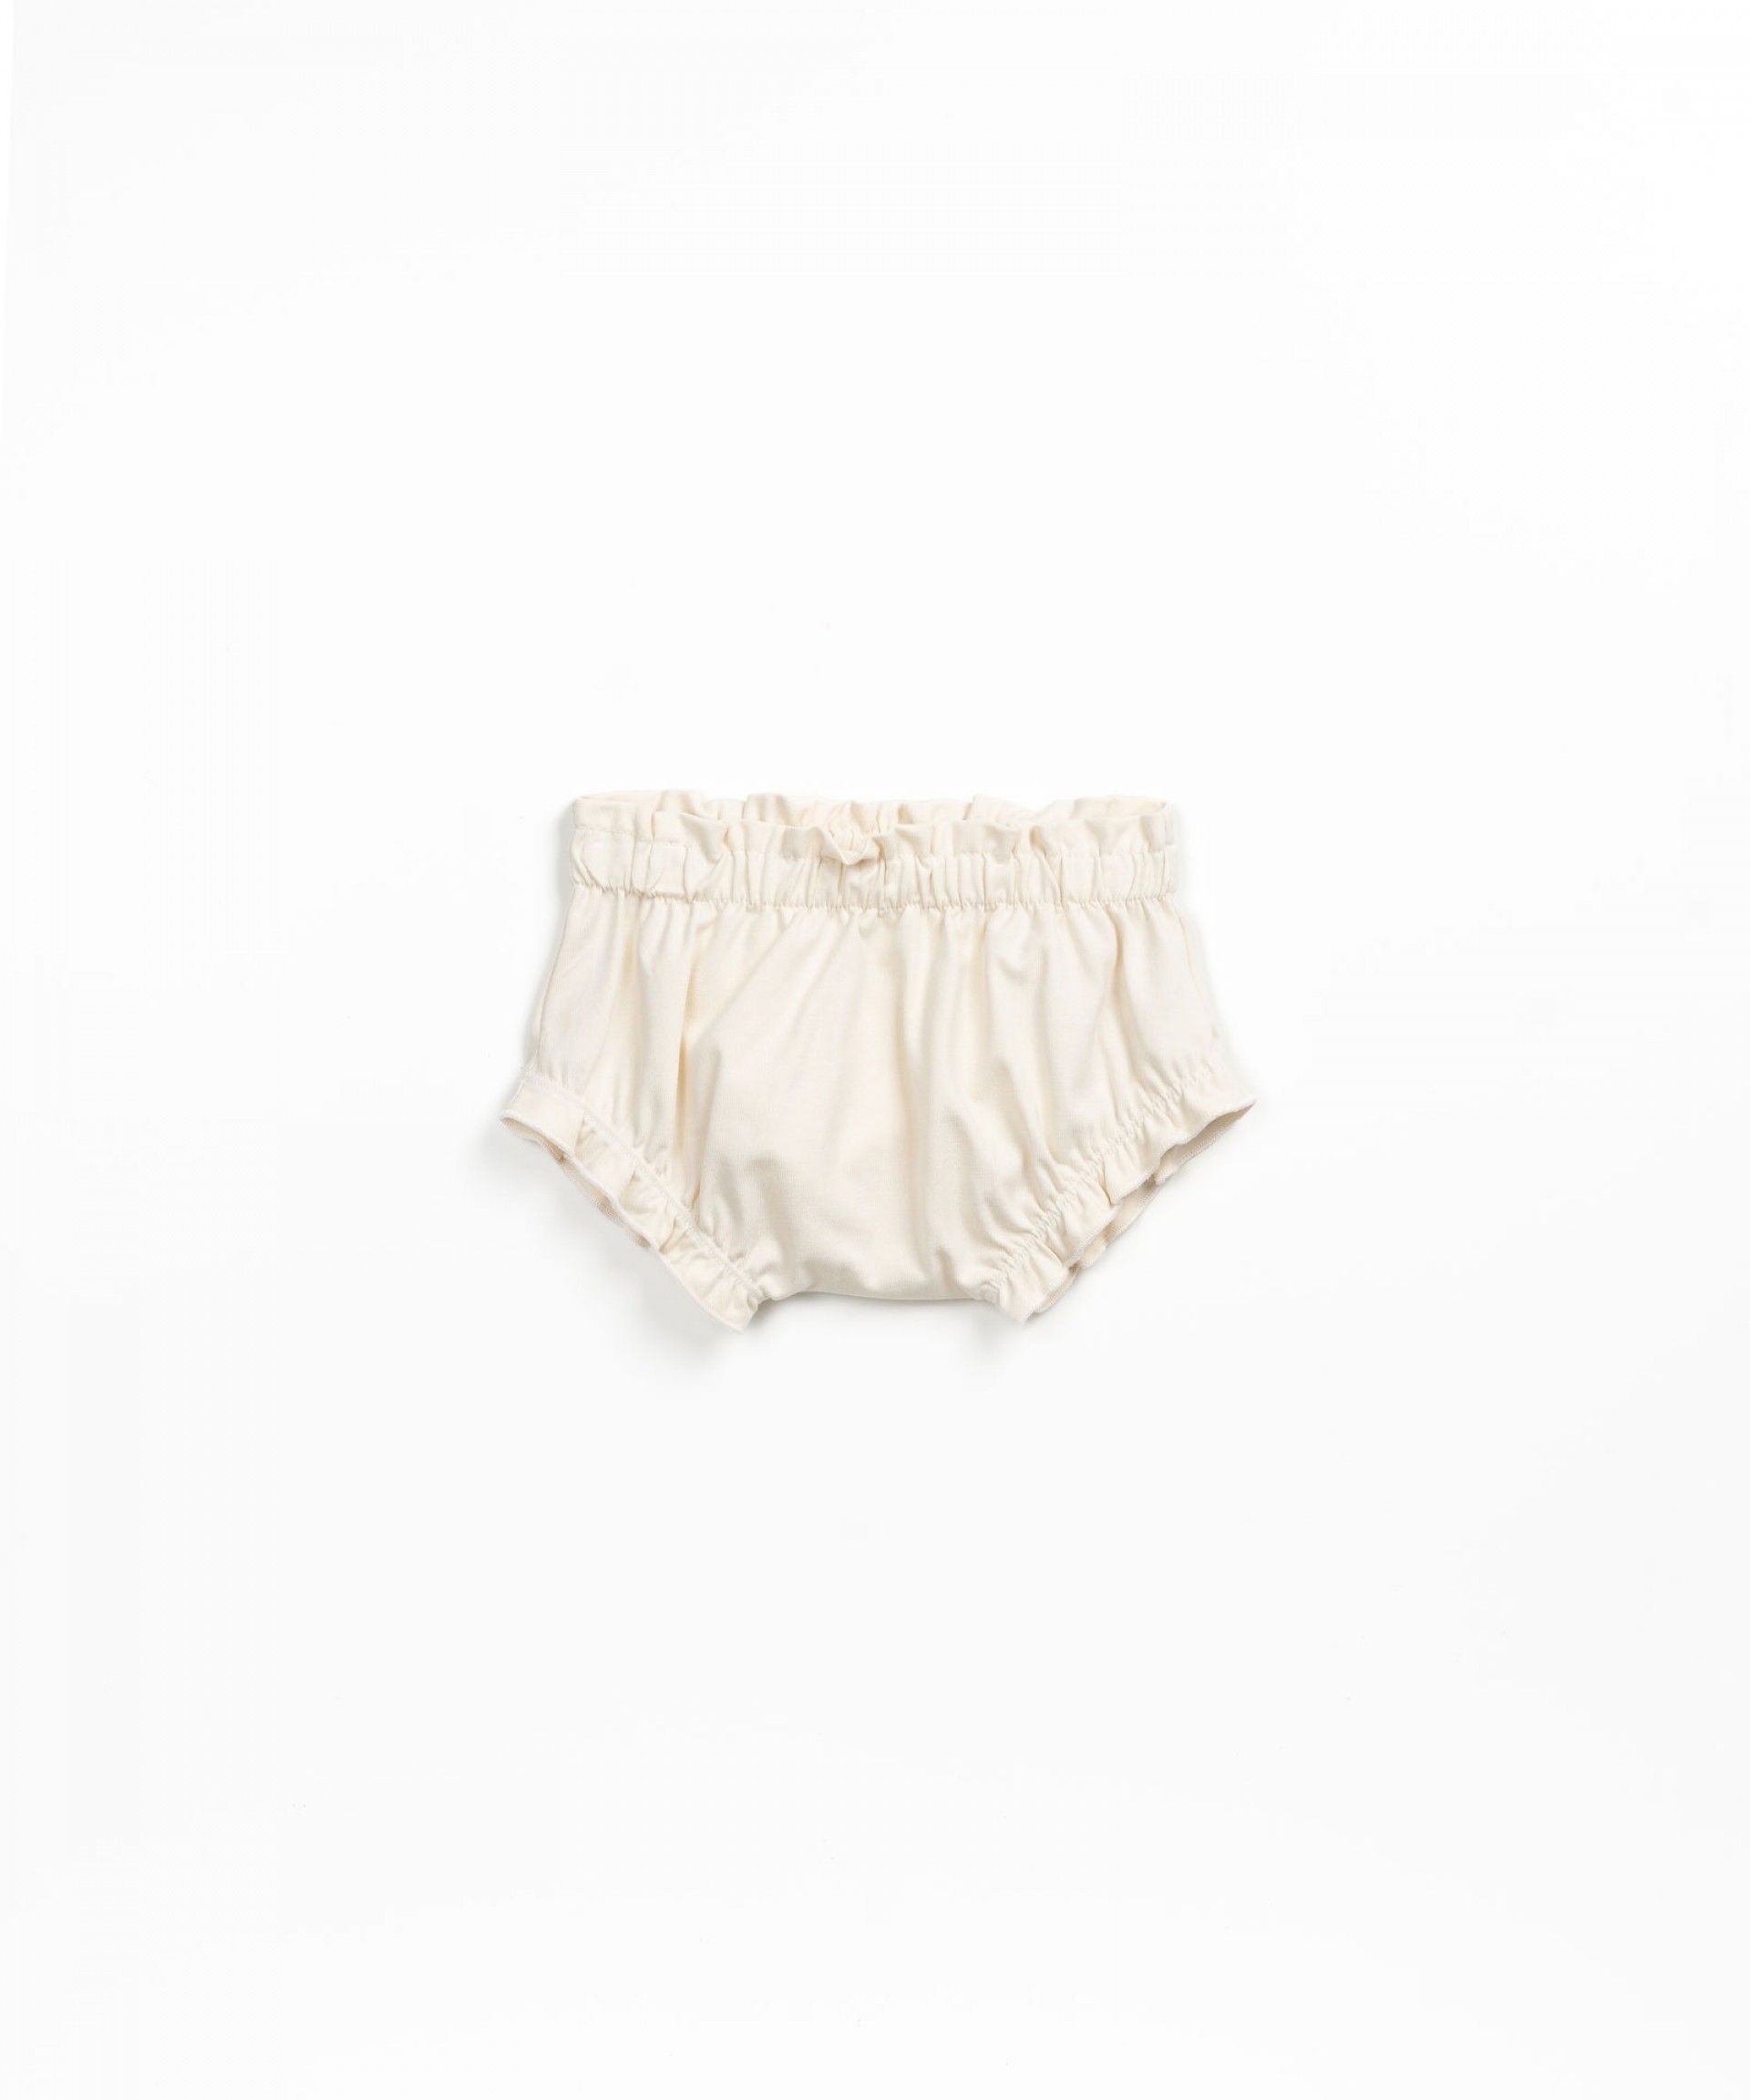 Organic cotton underpants with frill | Textile Art